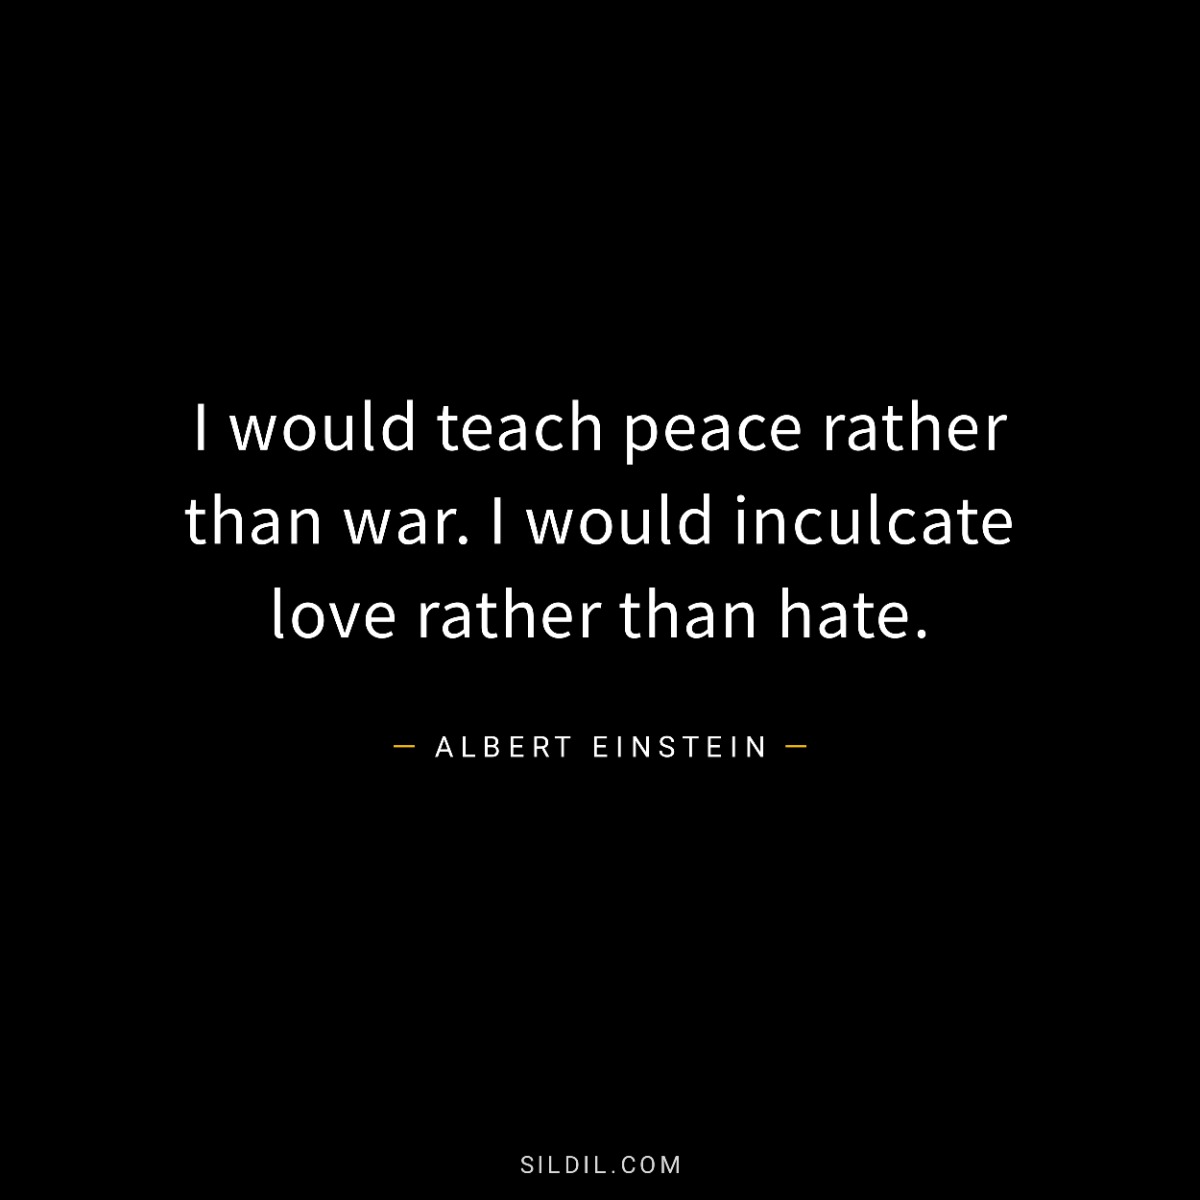 I would teach peace rather than war. I would inculcate love rather than hate.